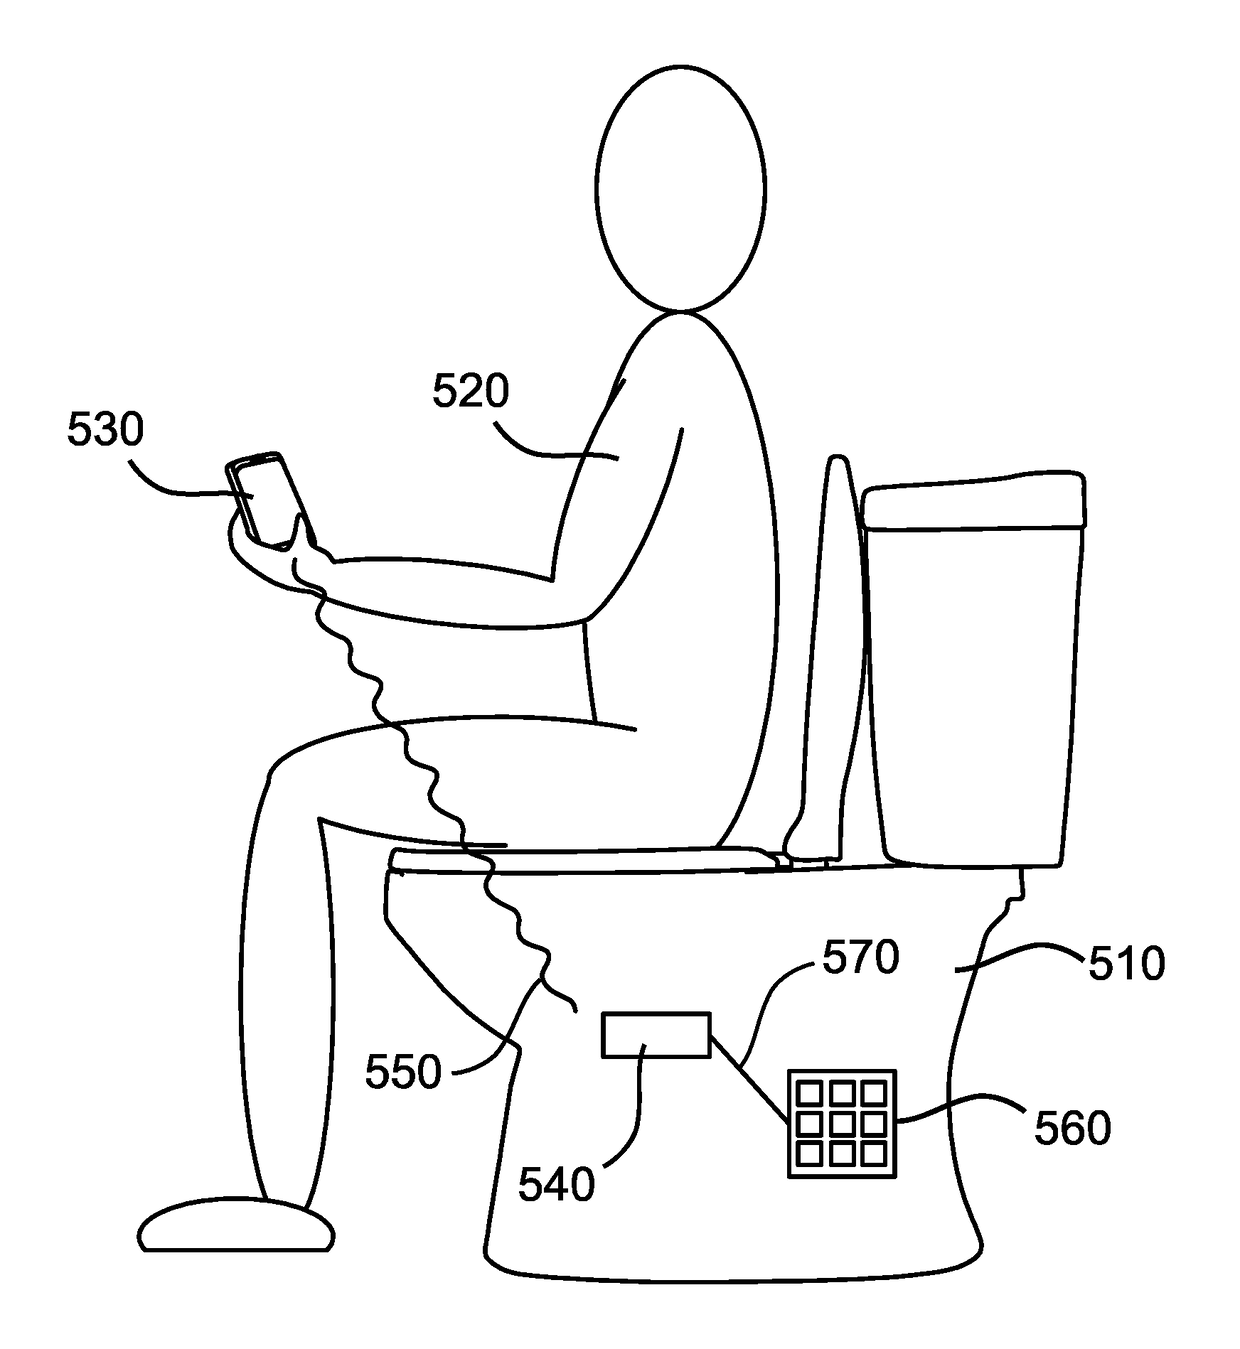 Toilet that detects drug markers and methods of use thereof